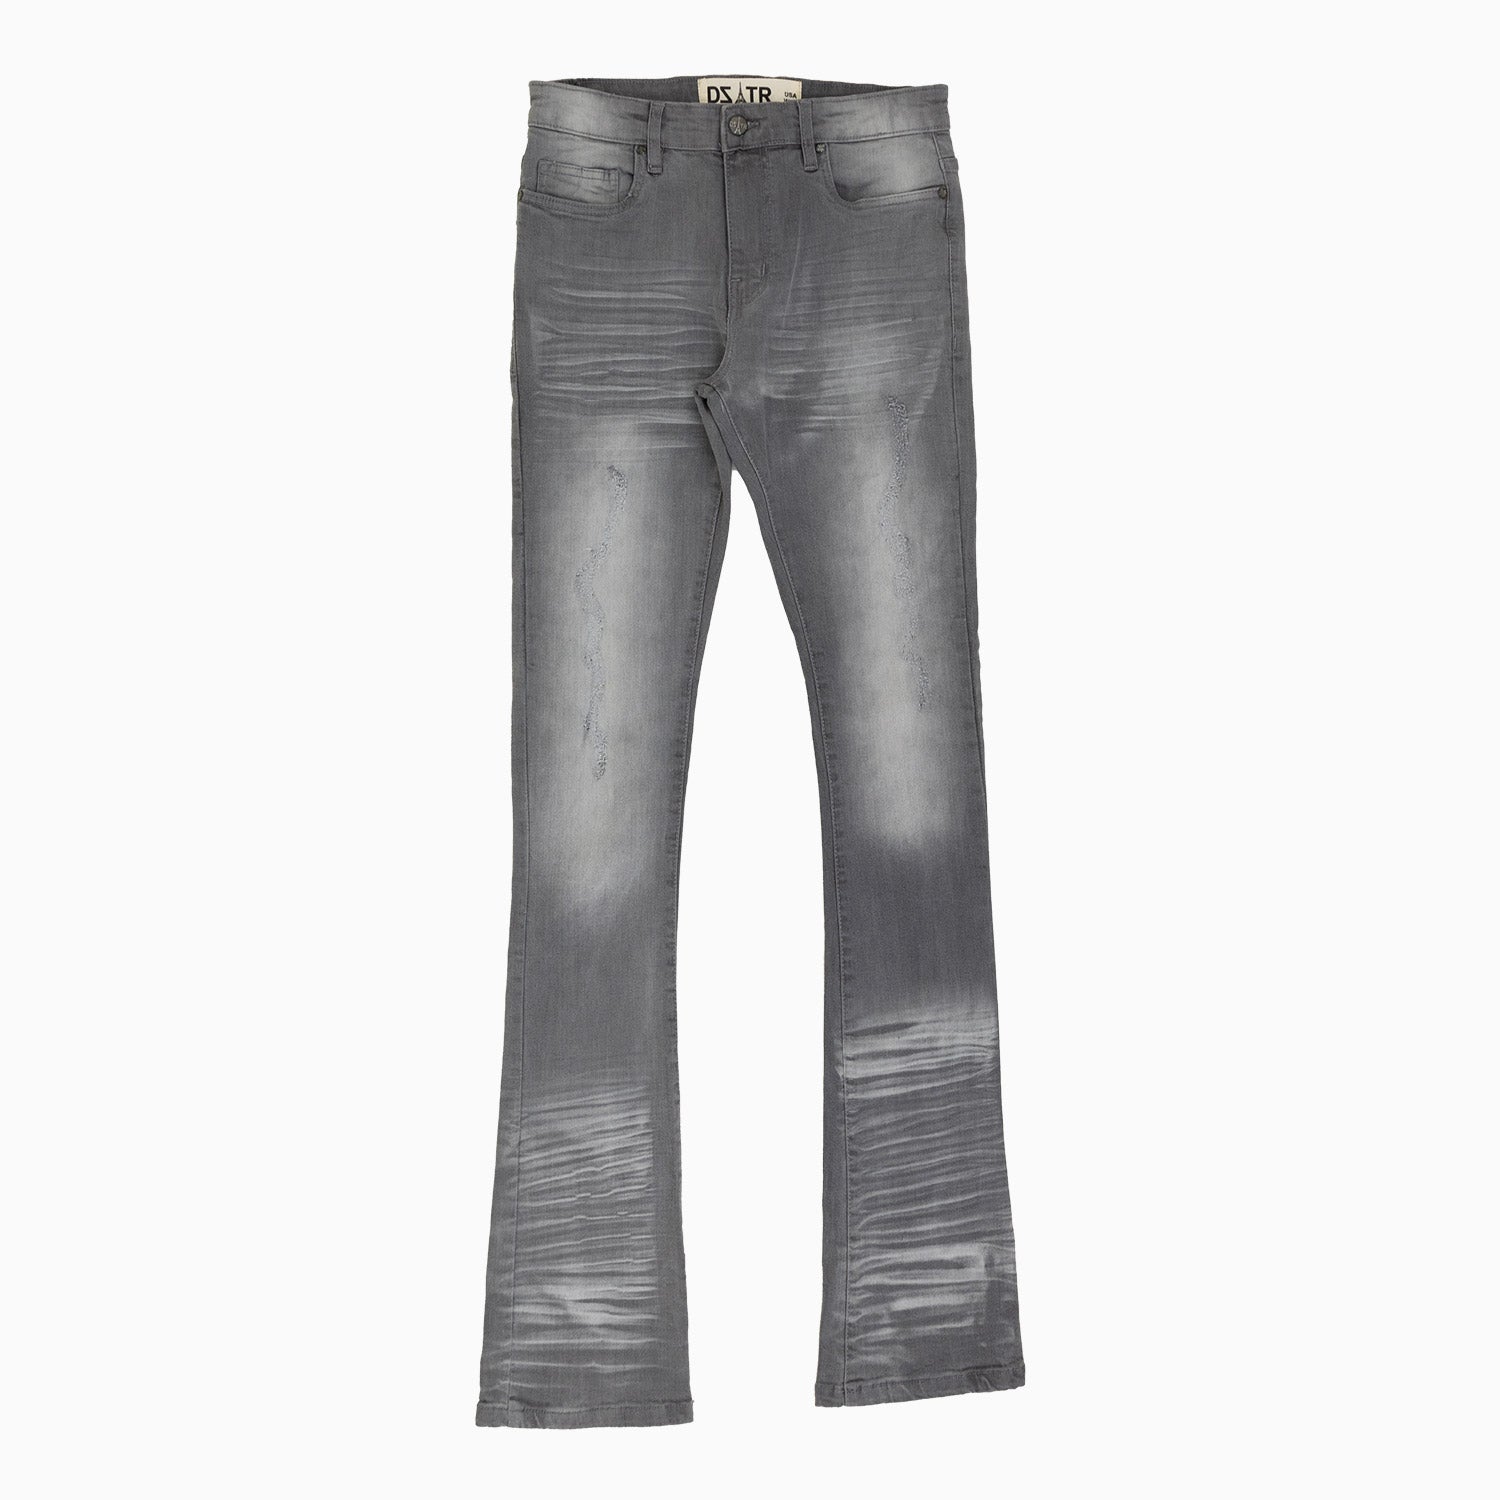 premium-disaster-mens-stacked-skinny-jeans-pant-pd-t-033